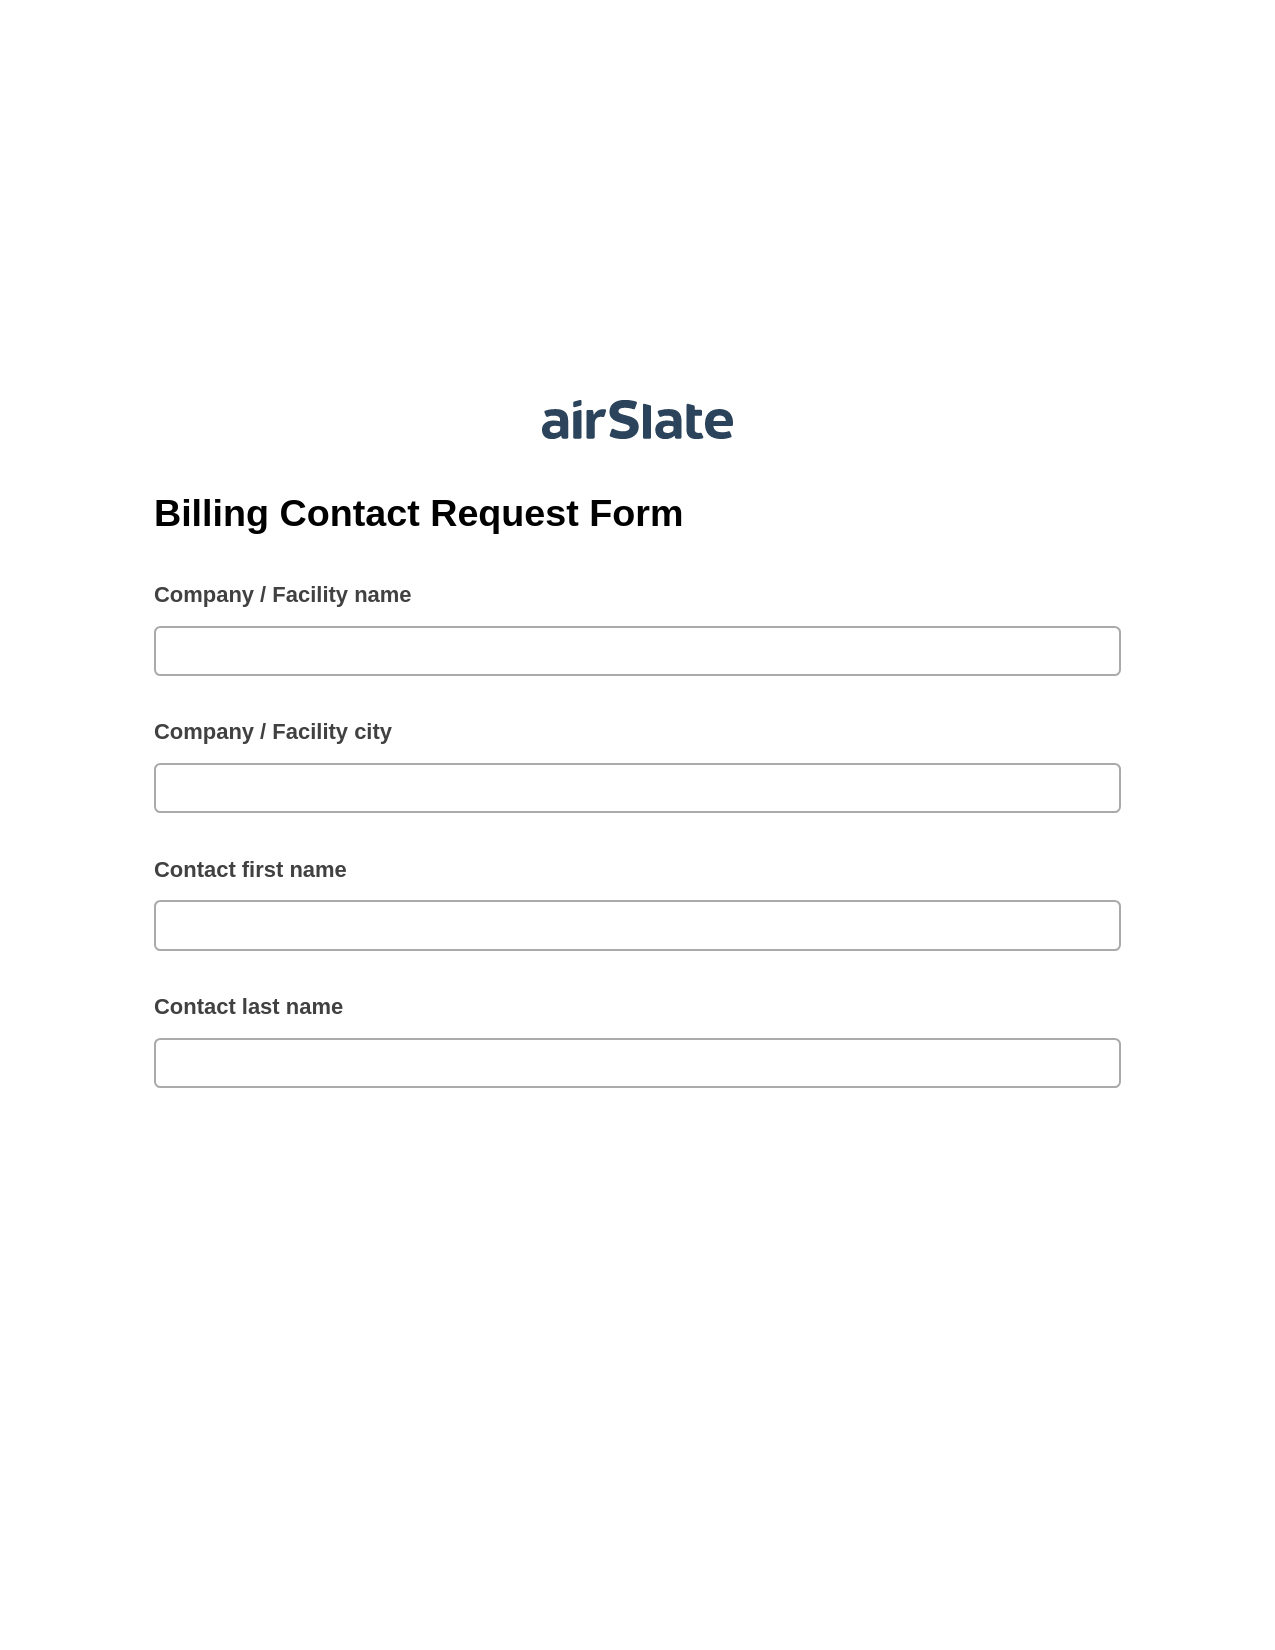 Multirole Billing Contact Request Form Pre-fill Dropdowns from CSV File Bot, Update NetSuite Records Bot, Post-finish Document Bot